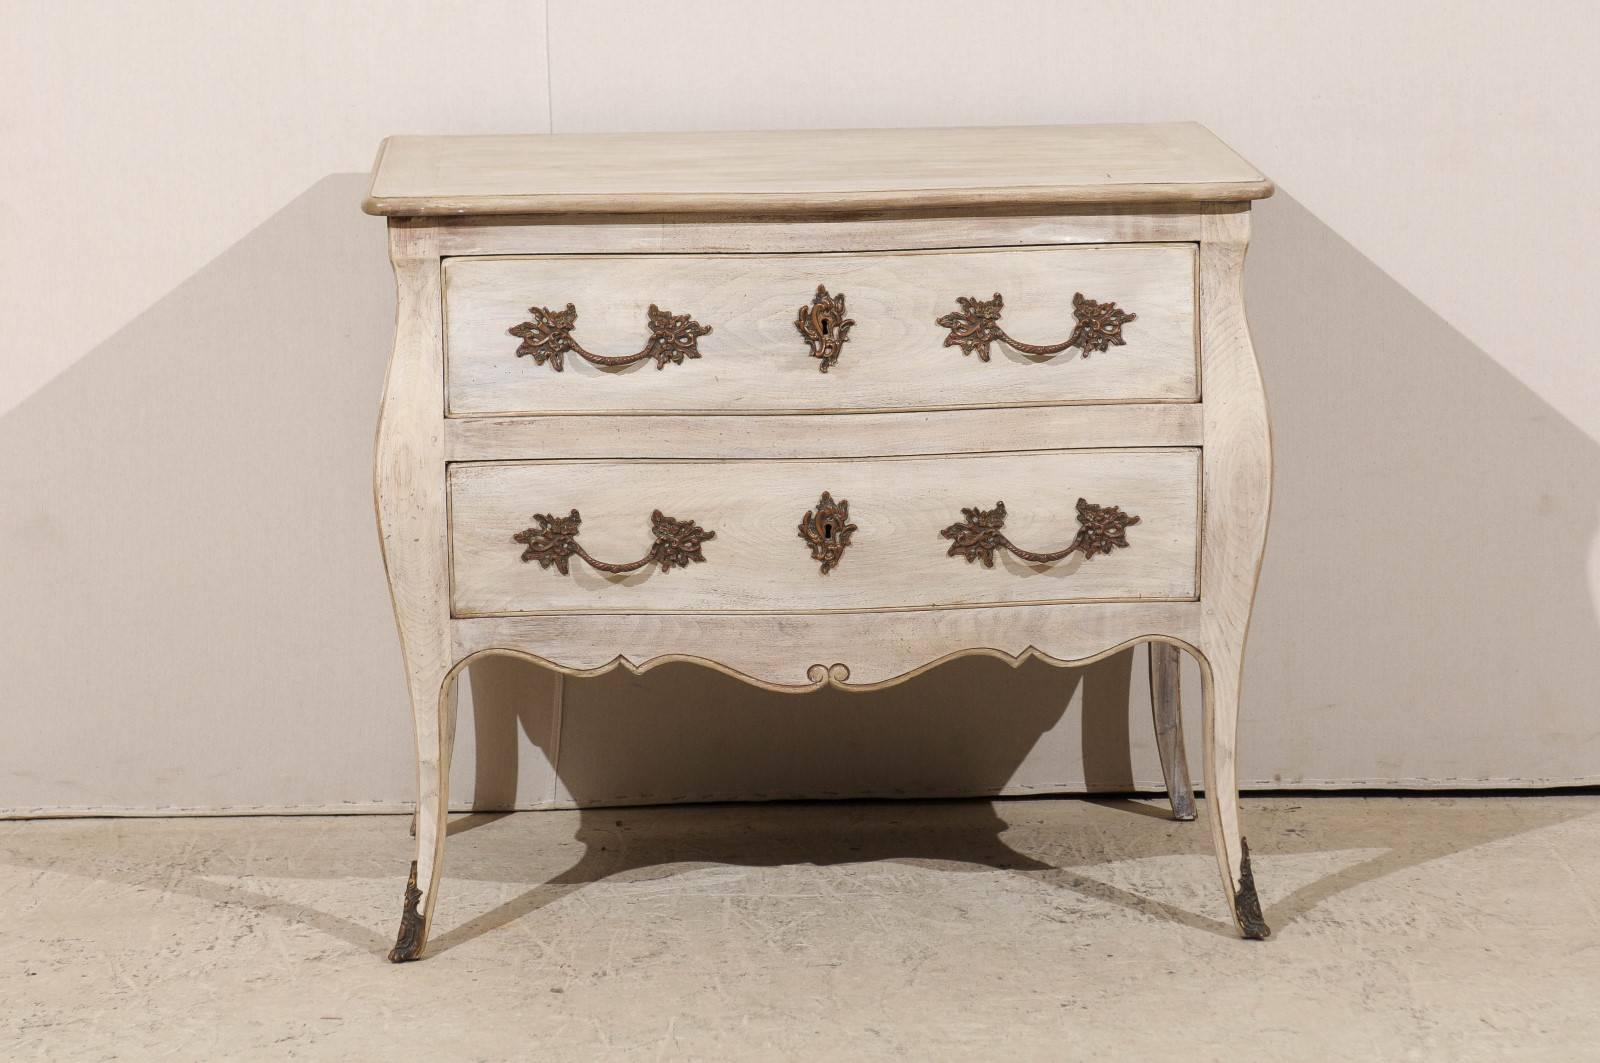 A French painted wood two-drawer raised chest from the late 19th century to early 20th century. This turn of the century chest from France has a nice bombé shape with scalloped and profiled skirt. The drawers are ornate with Rococo style hardware.